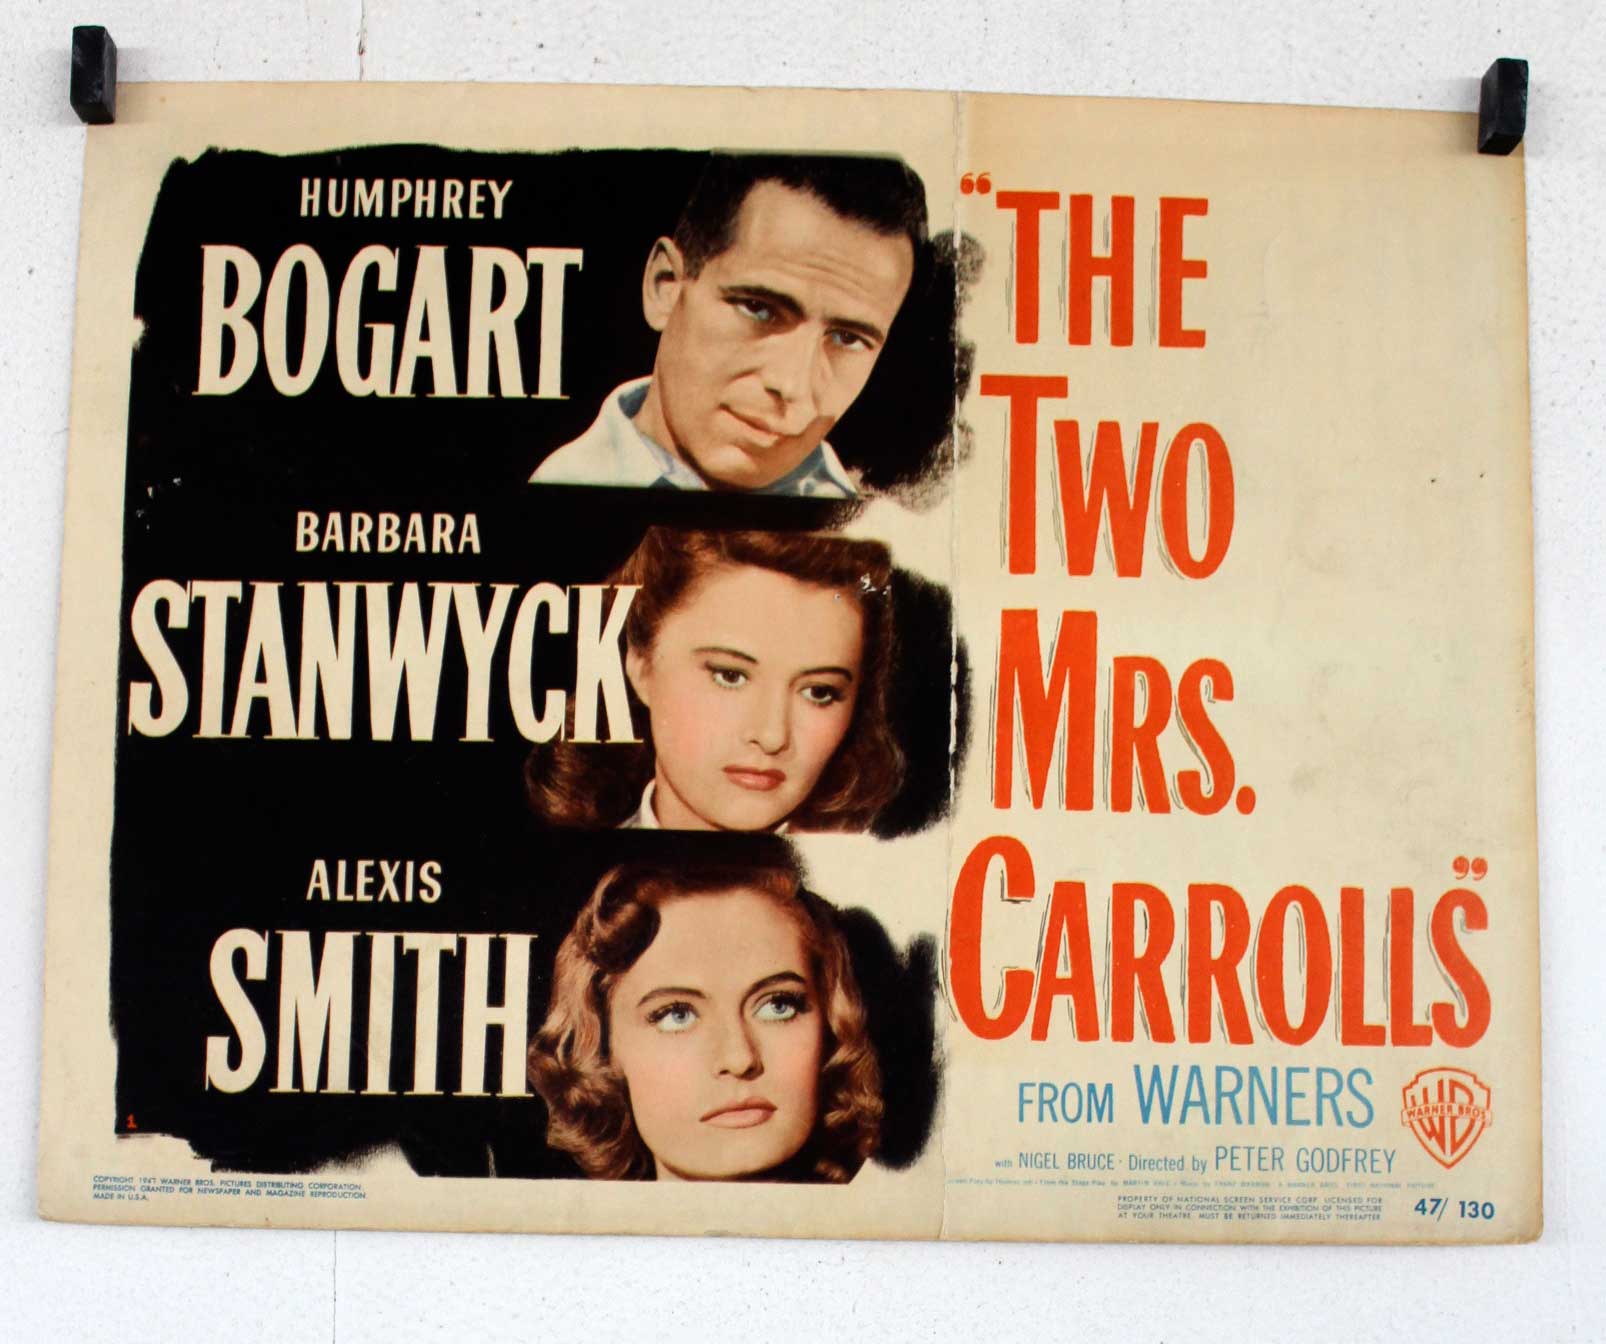 TWO MRS. CARROLLS, THE